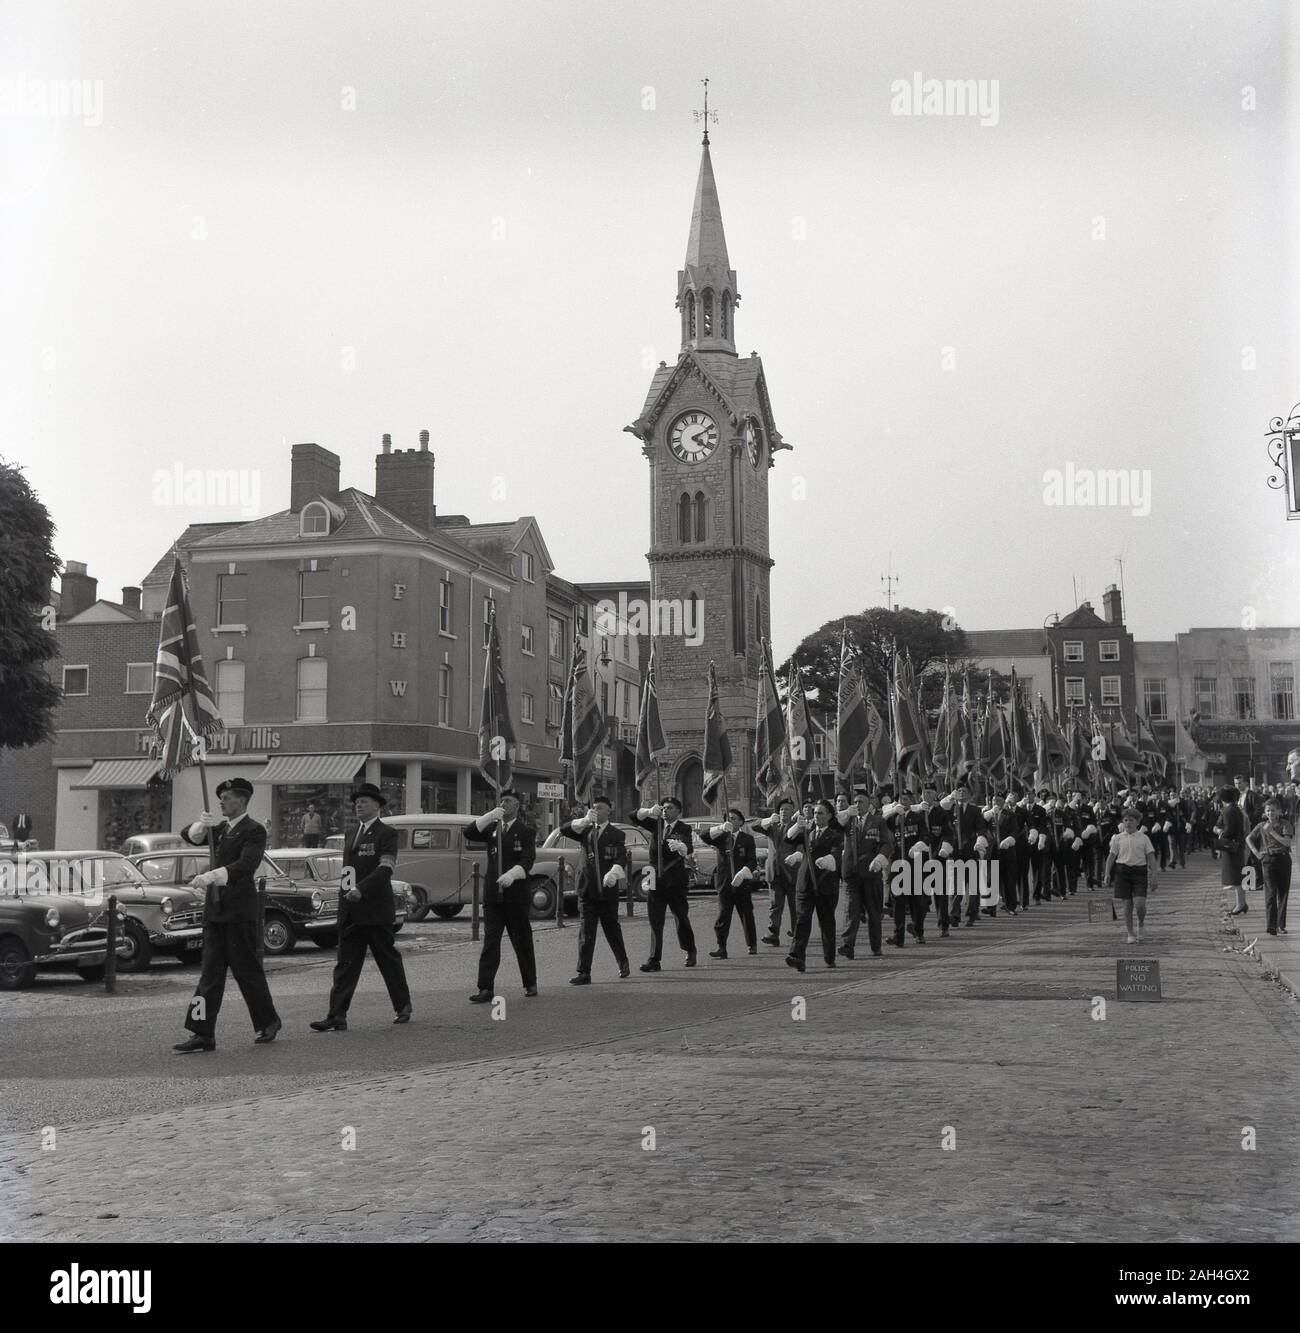 1965 historical, Royal British Legion parade, 'Best of British', former soldiers marching through the town, Aylesbury, England, UK. Stock Photo